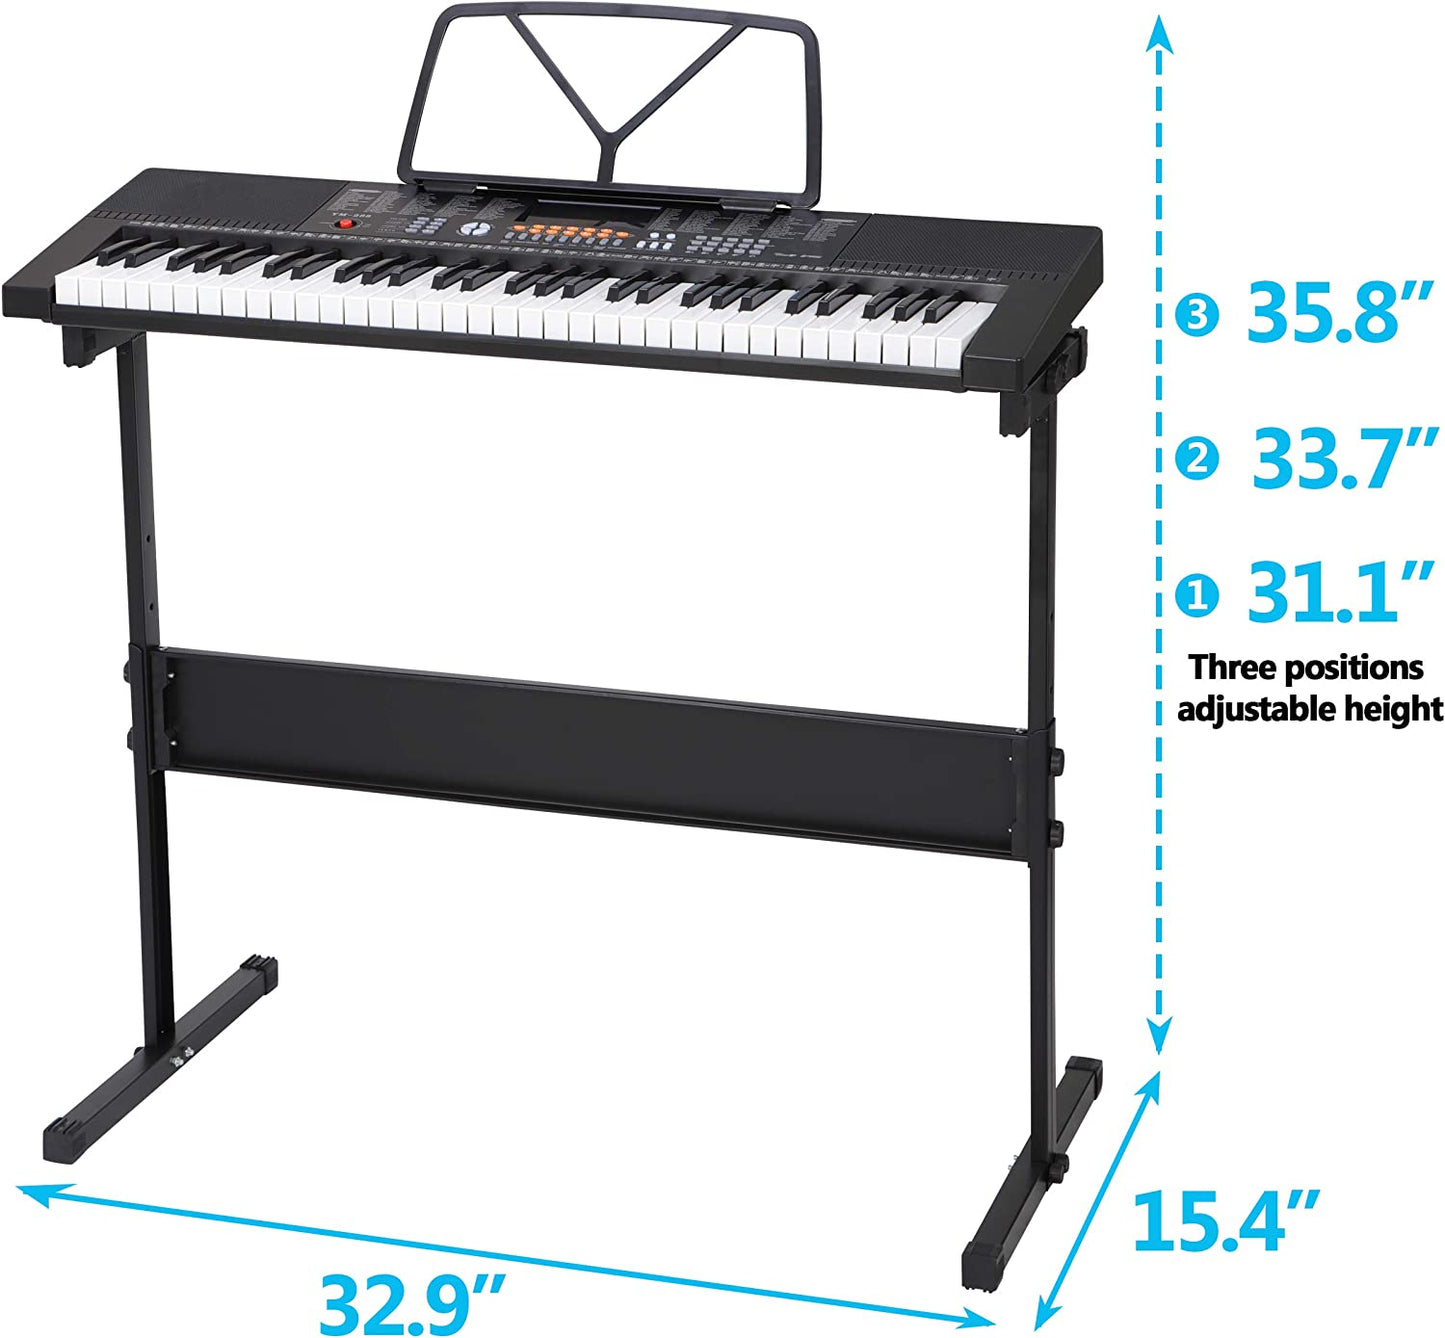 61-Key Portable Electric Keyboard Piano with Built In Speakers, LED Screen, Headphones, Microphone, Piano Stand, Music Sheet Stand and Stool